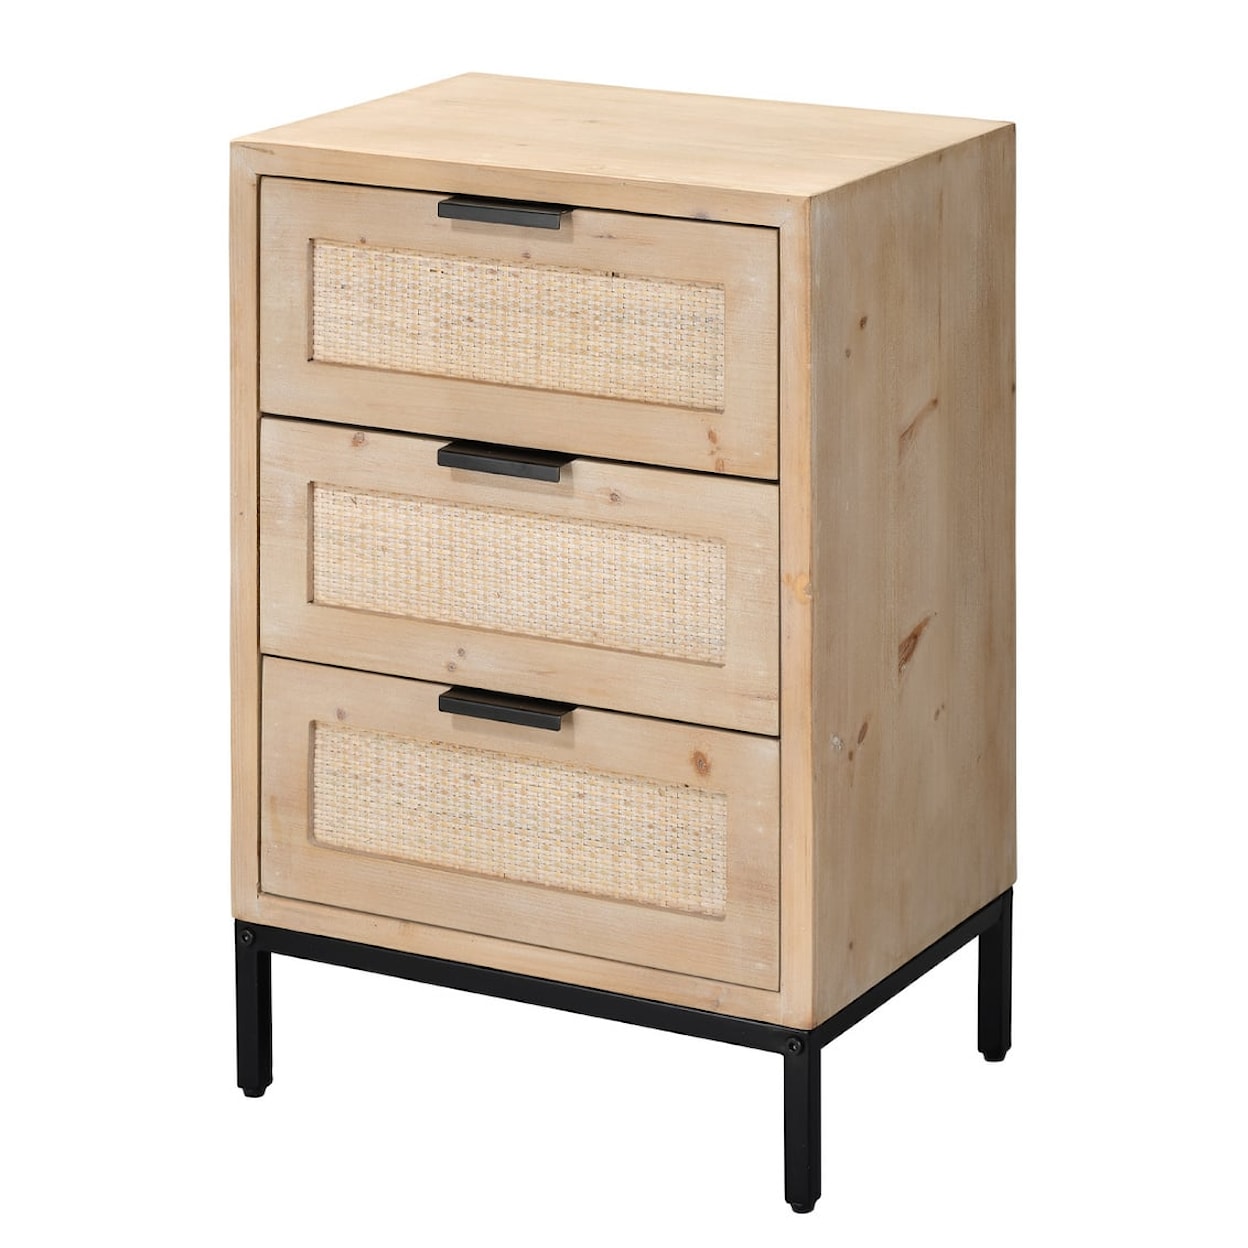 Jamie Young Co. Coastal Furniture REED 3 DRAWER SIDE TABLE